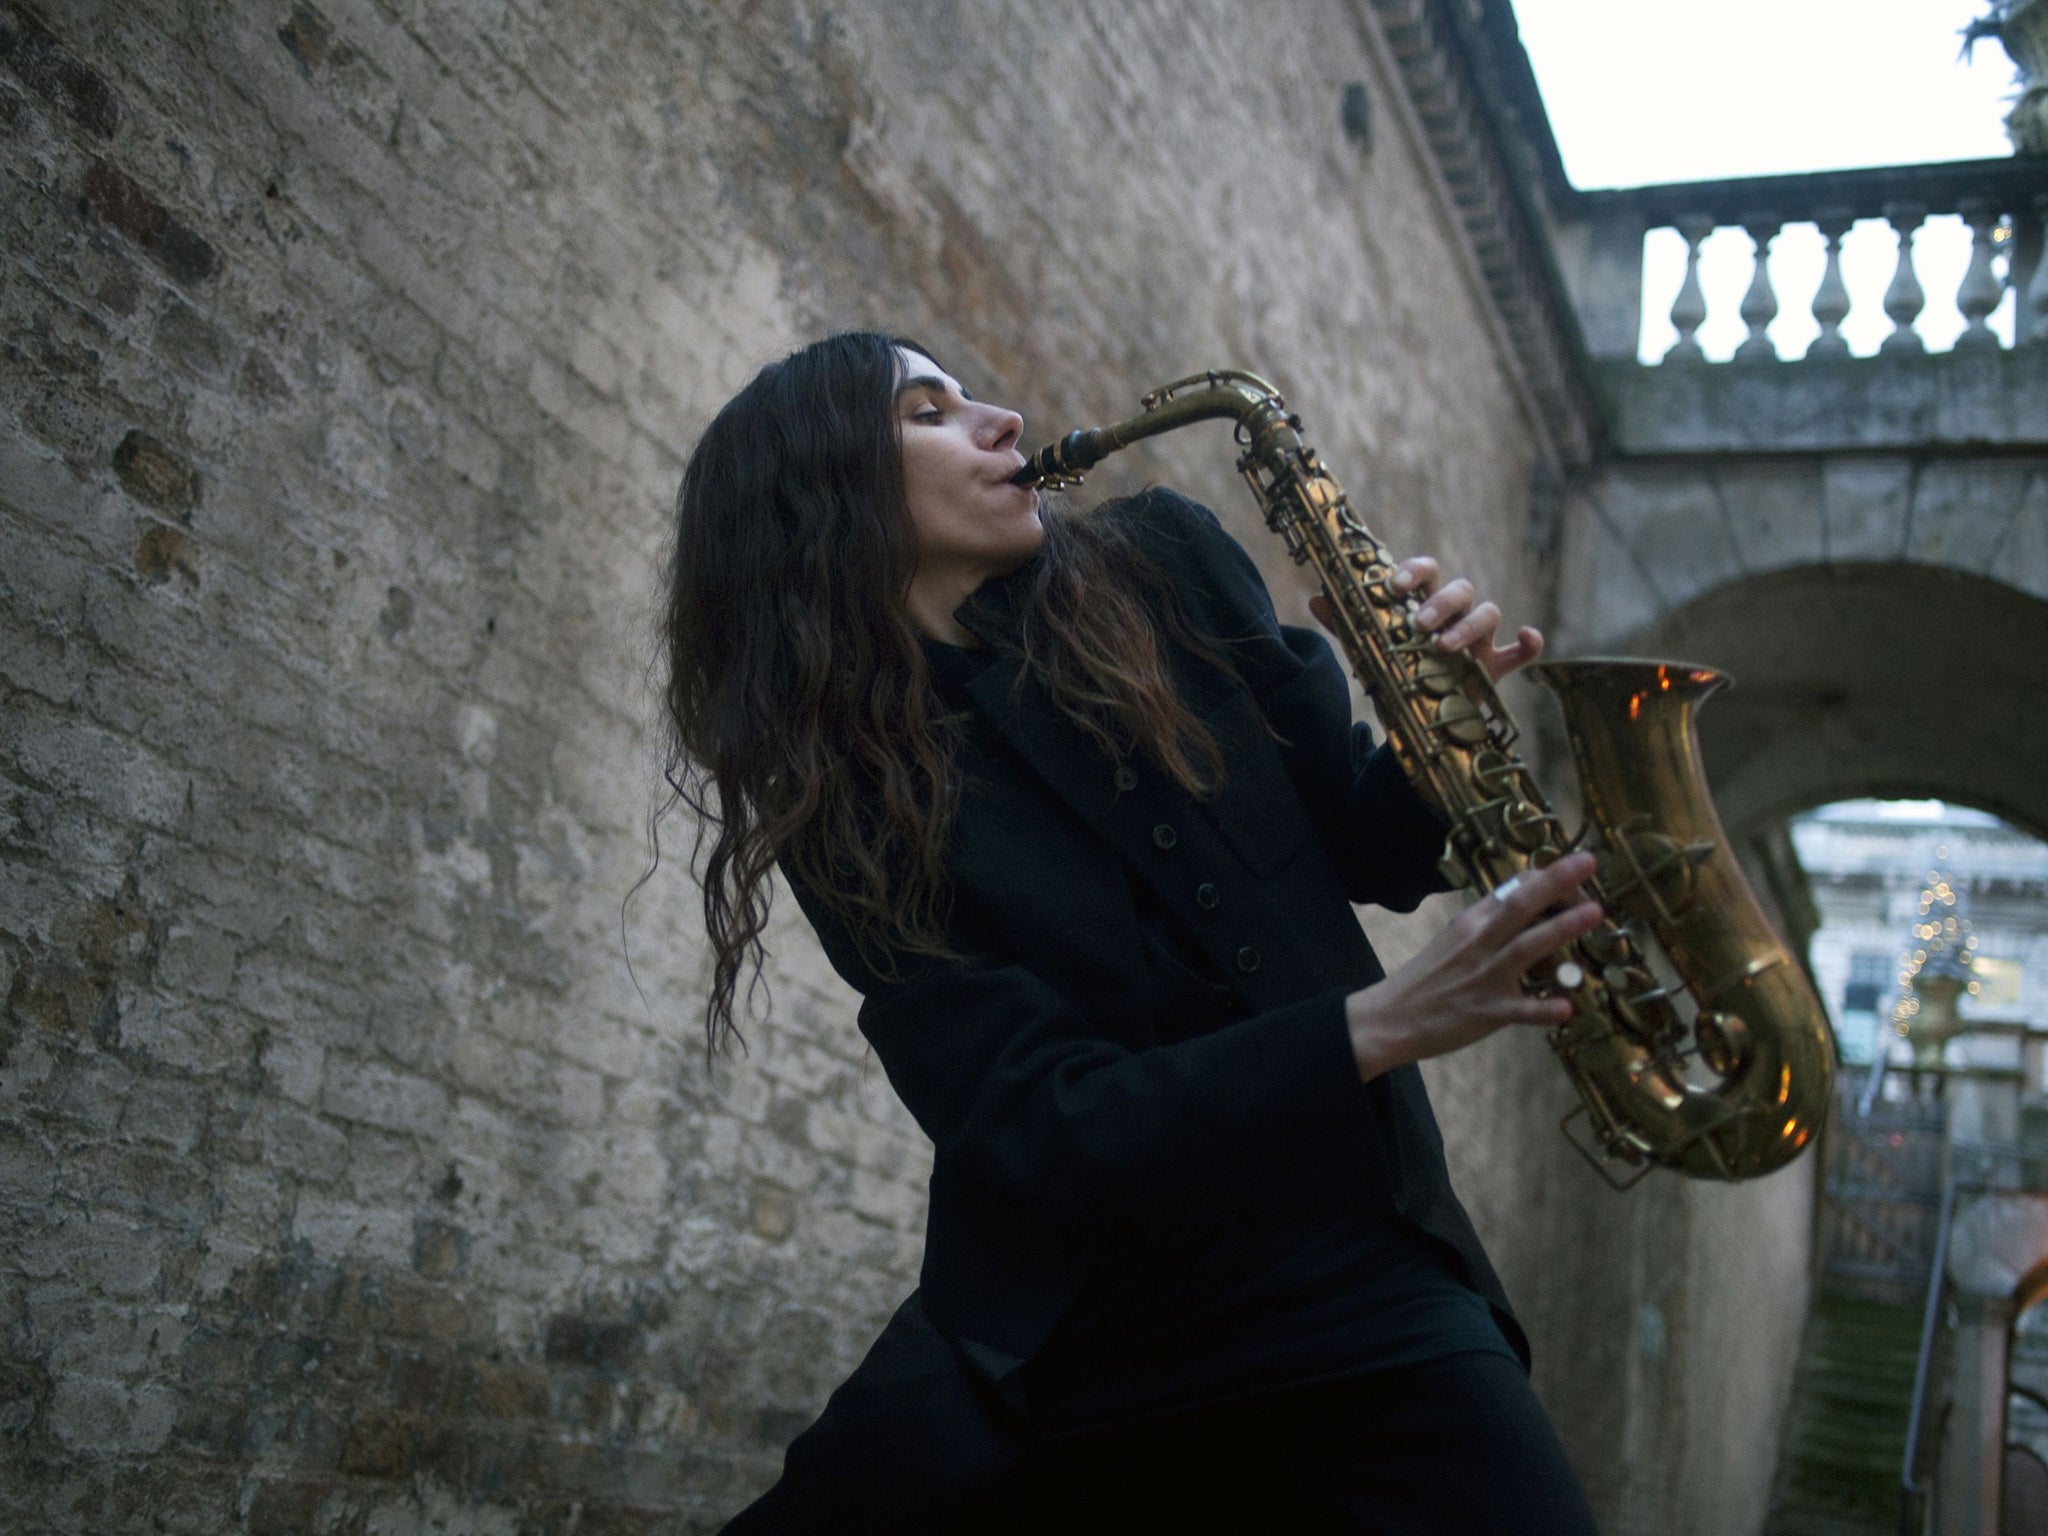 PJ Harvey will be working on her follow-up to 2011's Let England Shake